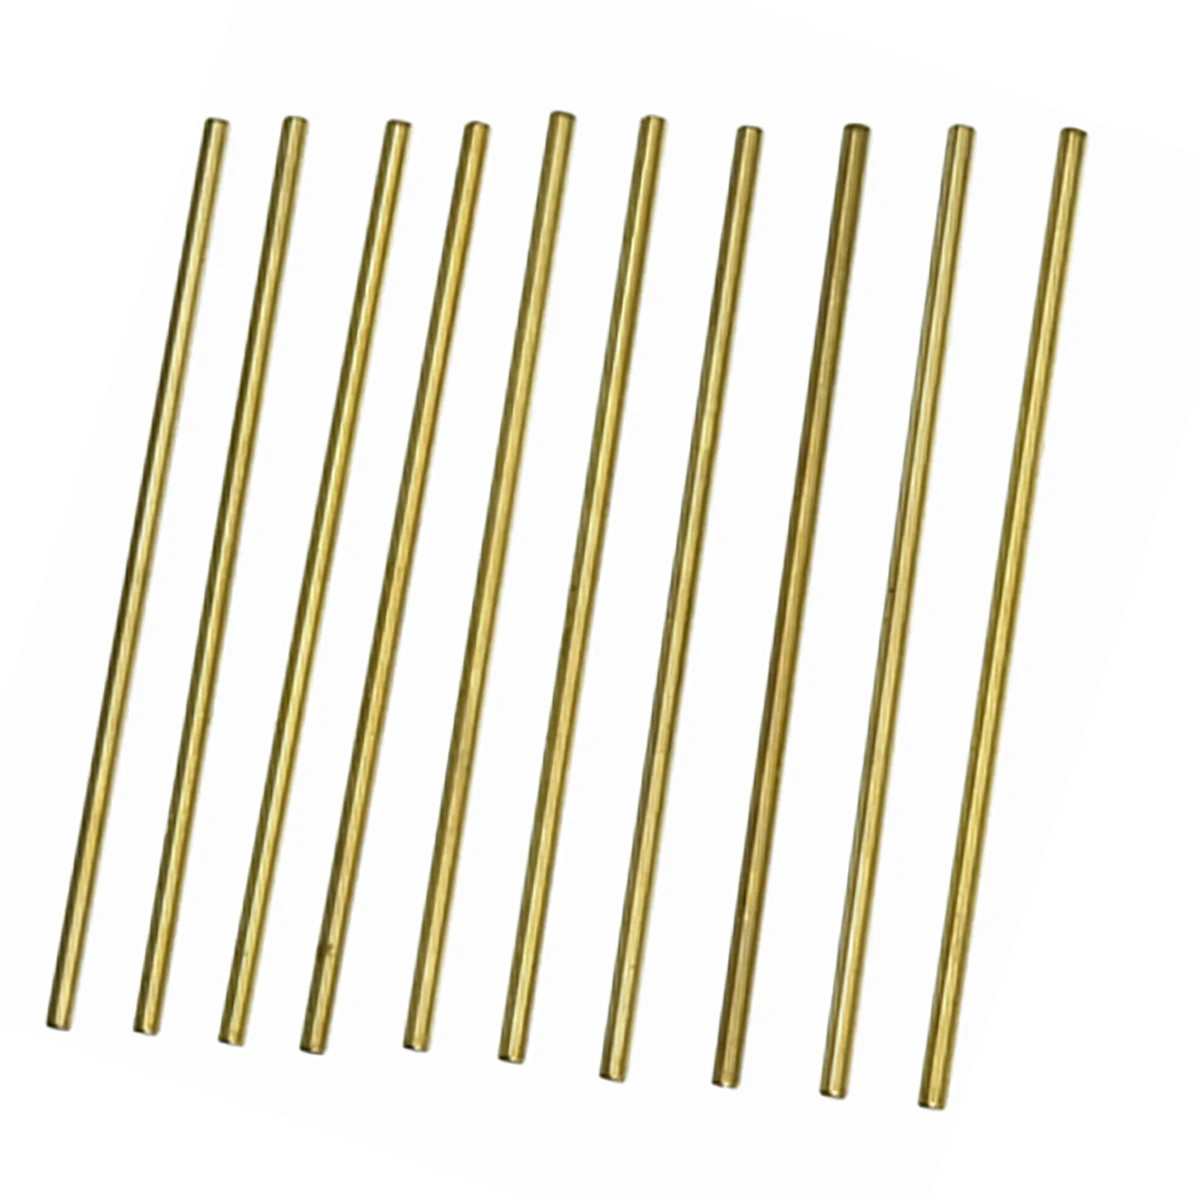 10pcs 1set  100mm Length 3mm Diameter Brass Round Rod Bar for RC Model Airplane Accessories